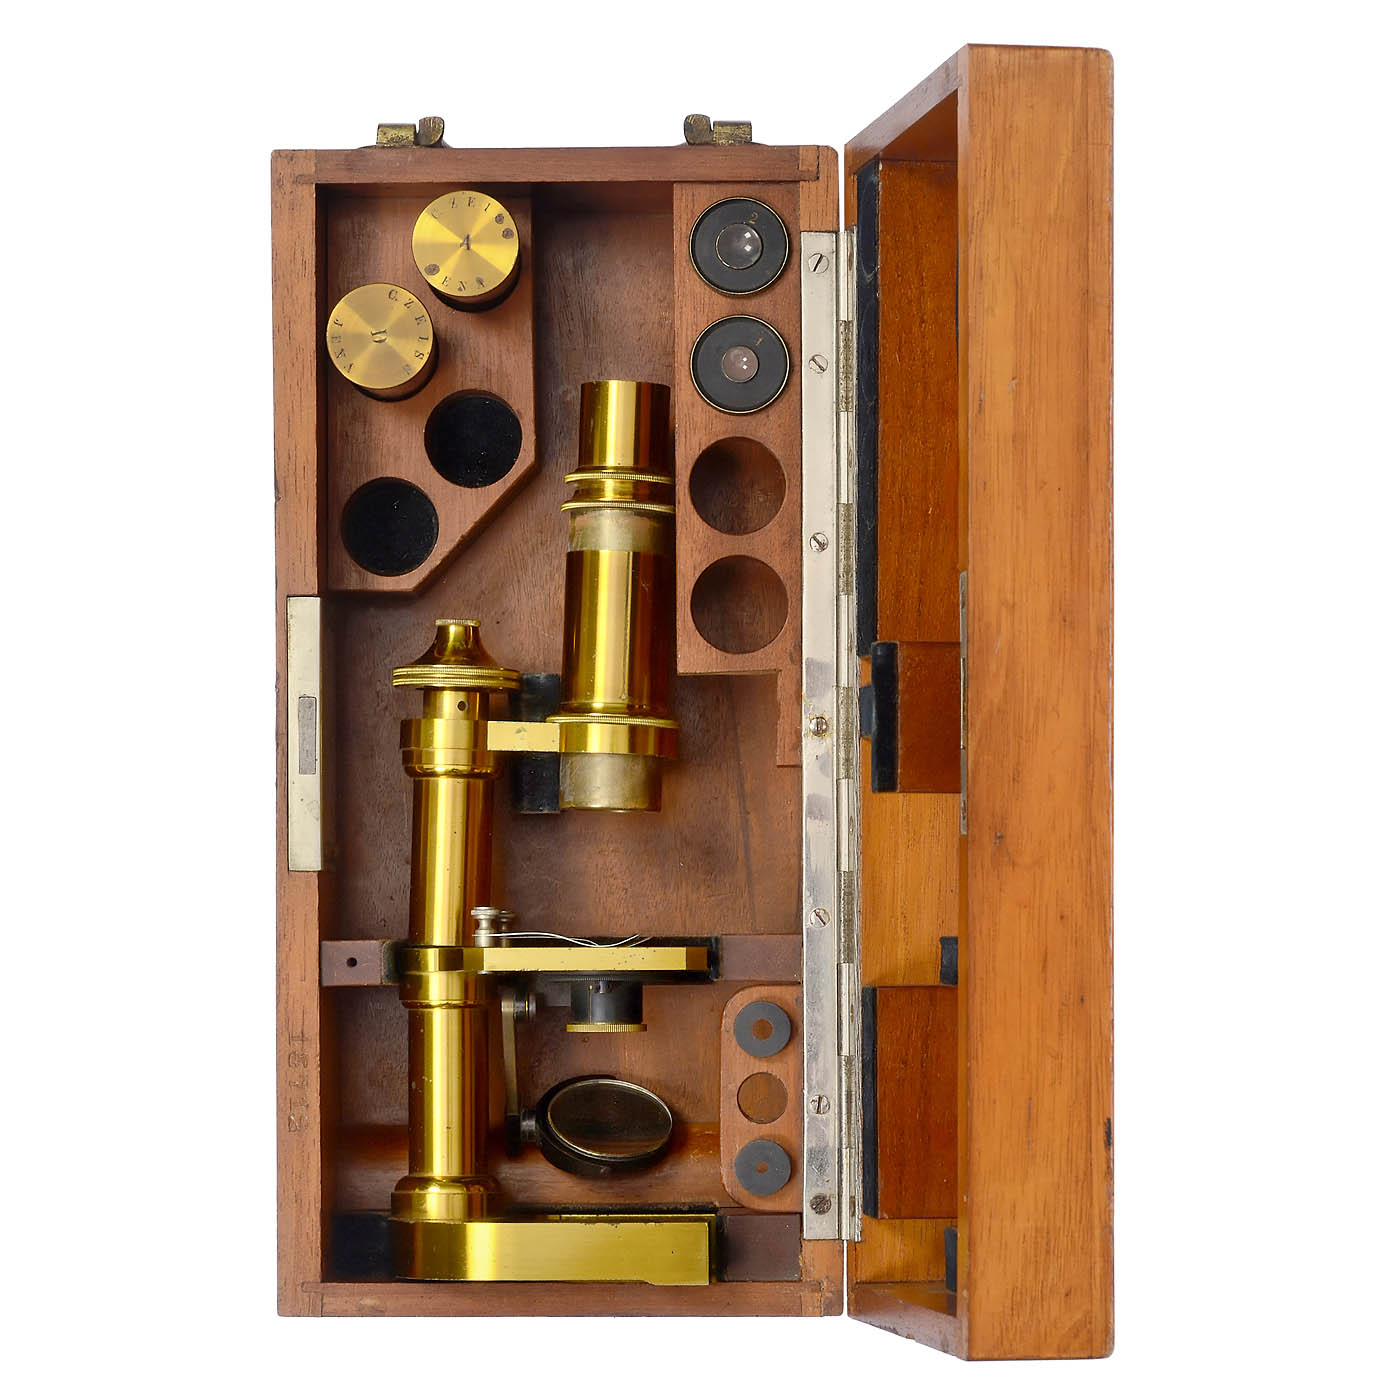 Laboratory Microscope by Zeiss, c. 1888 - Image 3 of 3